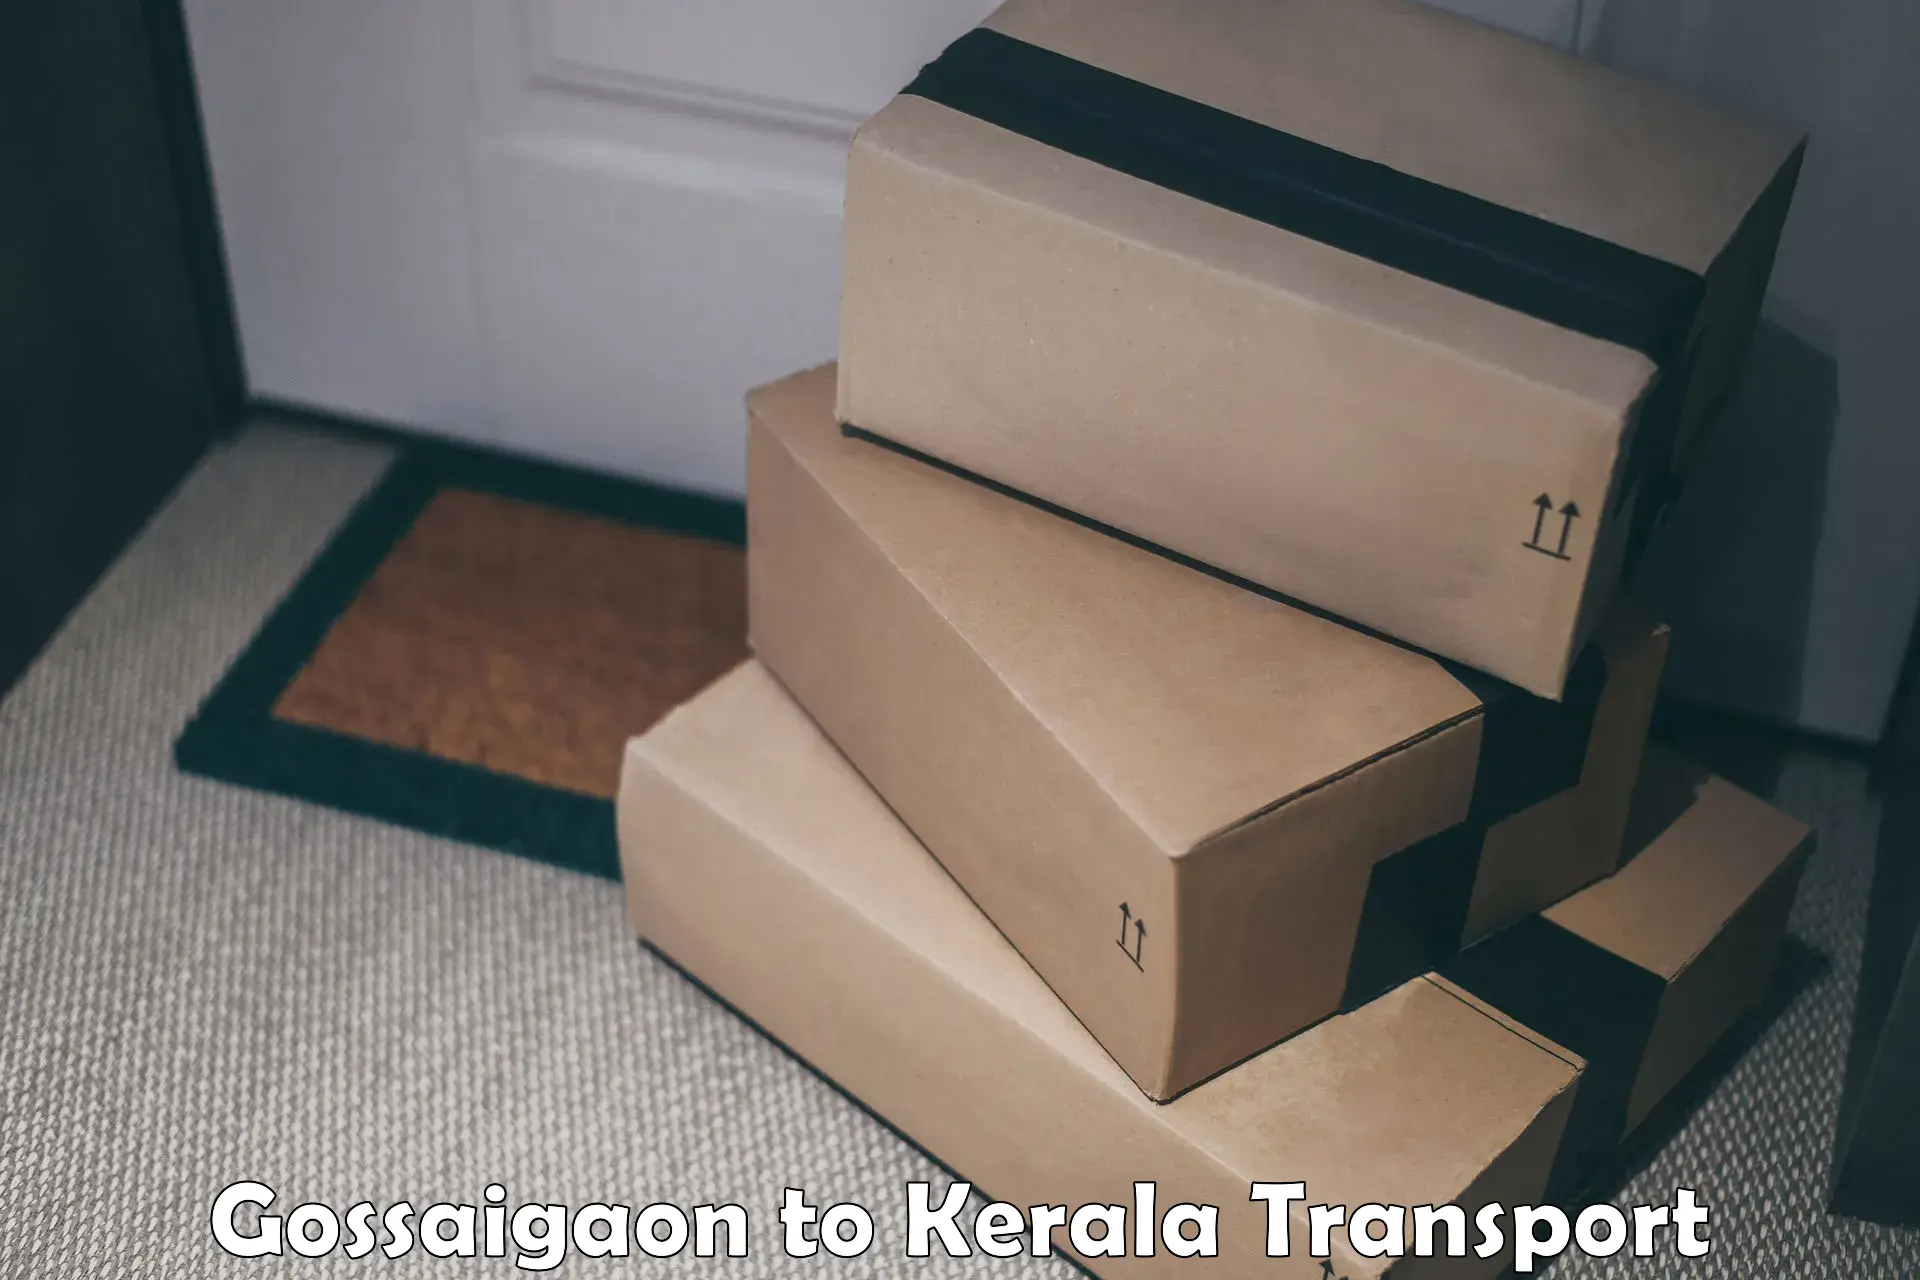 Delivery service Gossaigaon to Kerala